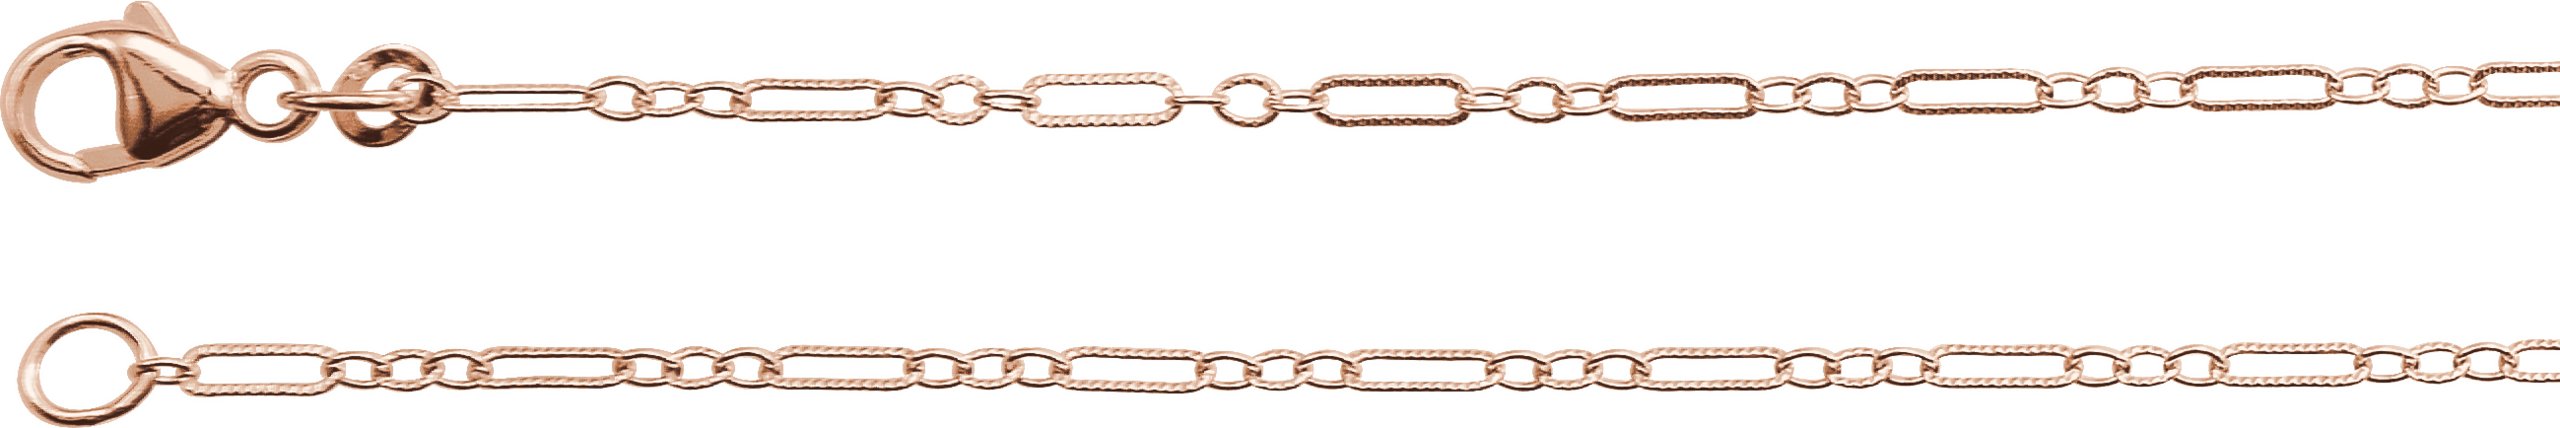 14K Rose 1.6 mm Knurled Figaro 16" Chain with Lobster Clasp  